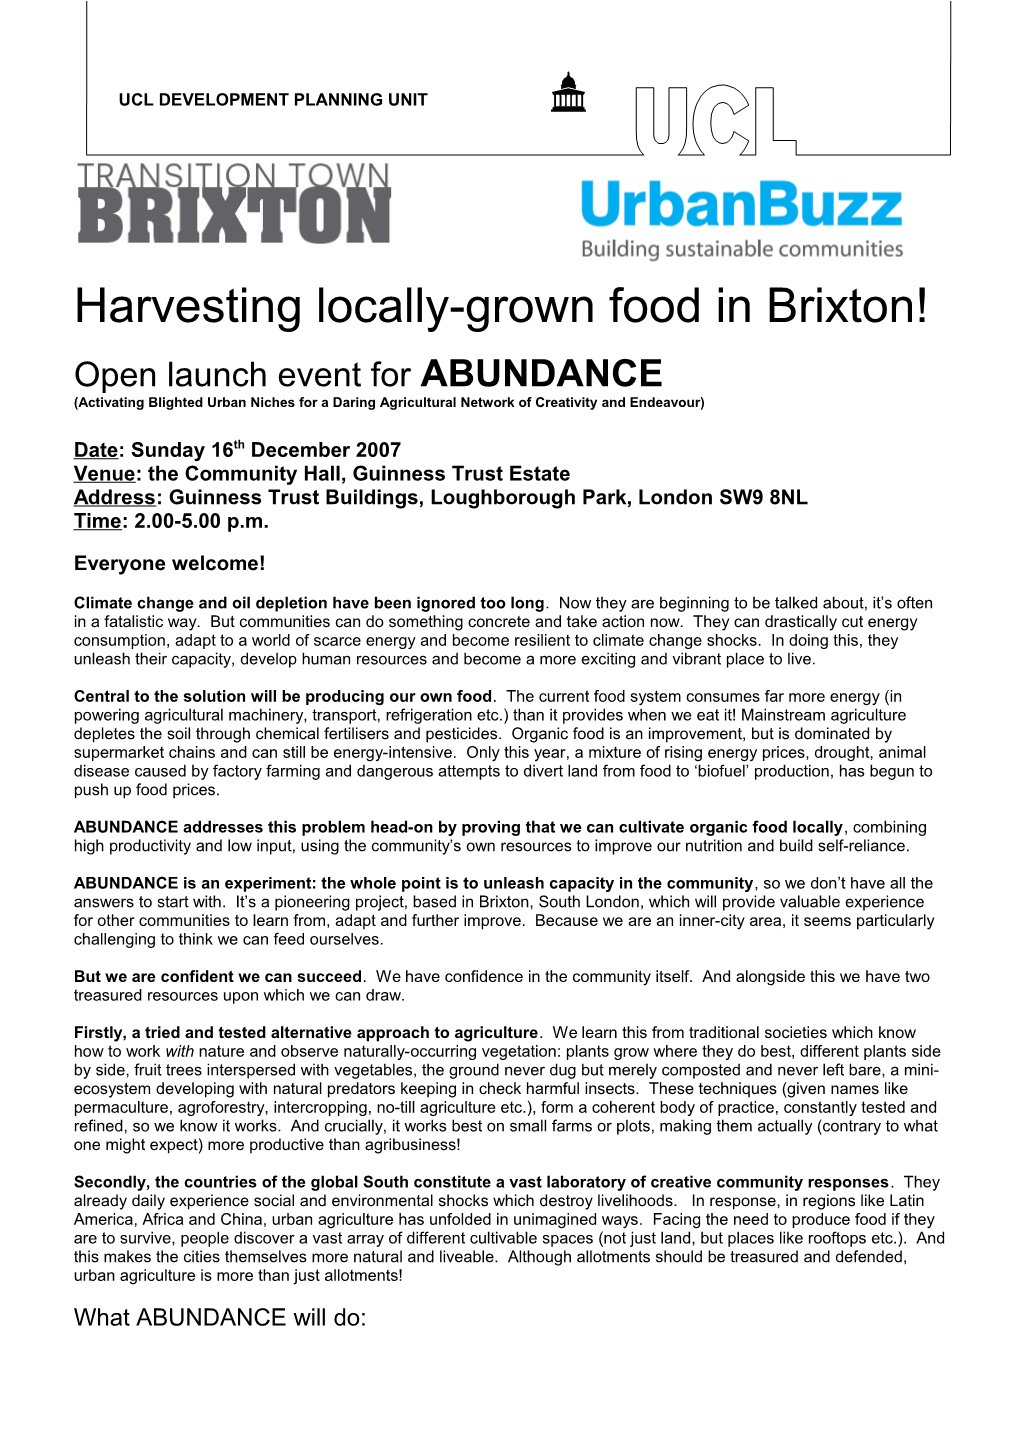 ABUNDANCE (Activating Blighted Urban Niches for a Daring Agricultural Network of Creativity